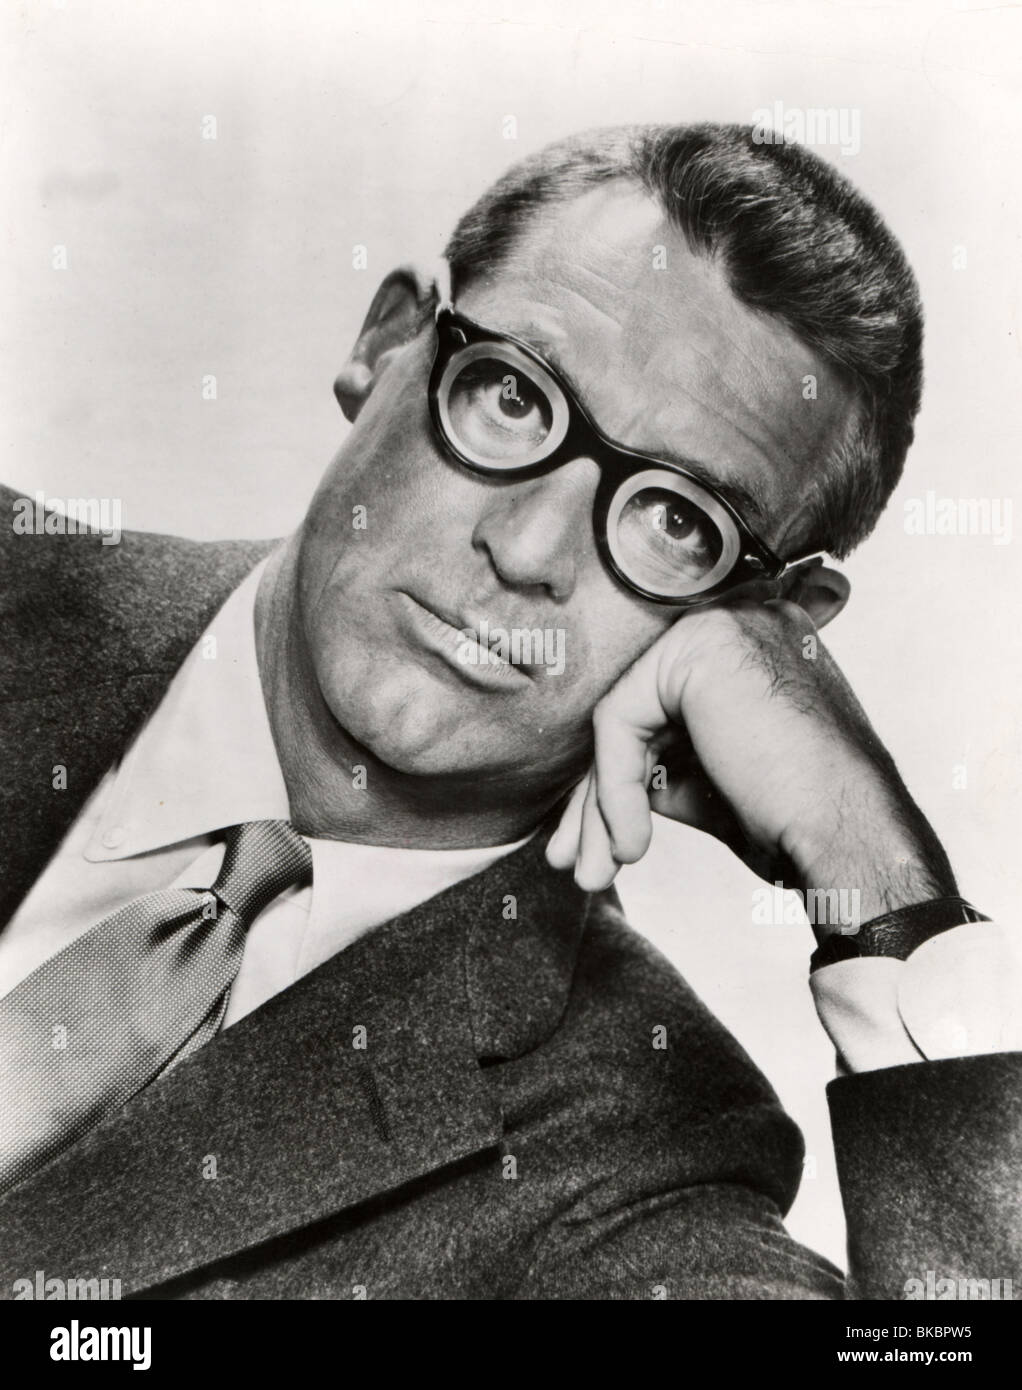 MONKEY BUSINESS (1952) CARY GRANT MNKY 005P Stock Photo